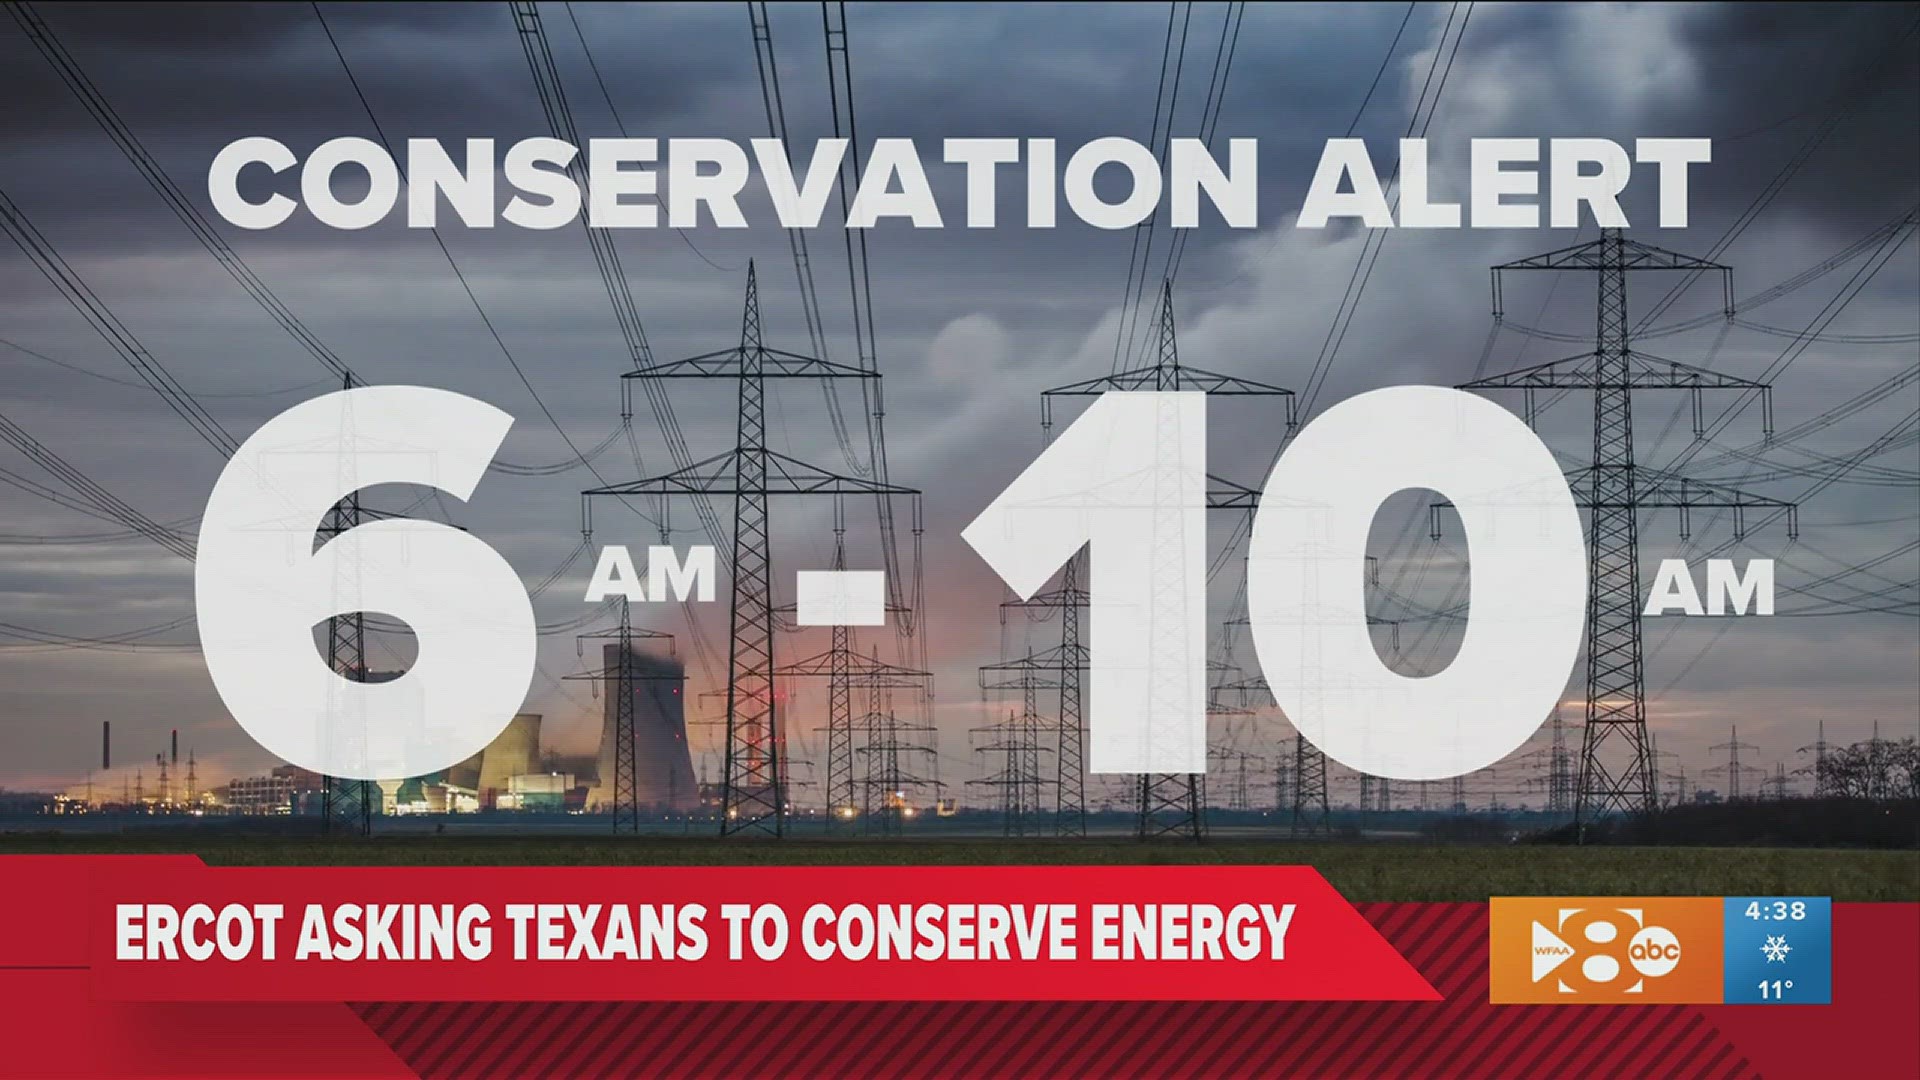 While emphasizing that there was no cause for concern, ERCOT asked Texans to conserve energy on Monday from 6 a.m. to 10 a.m.